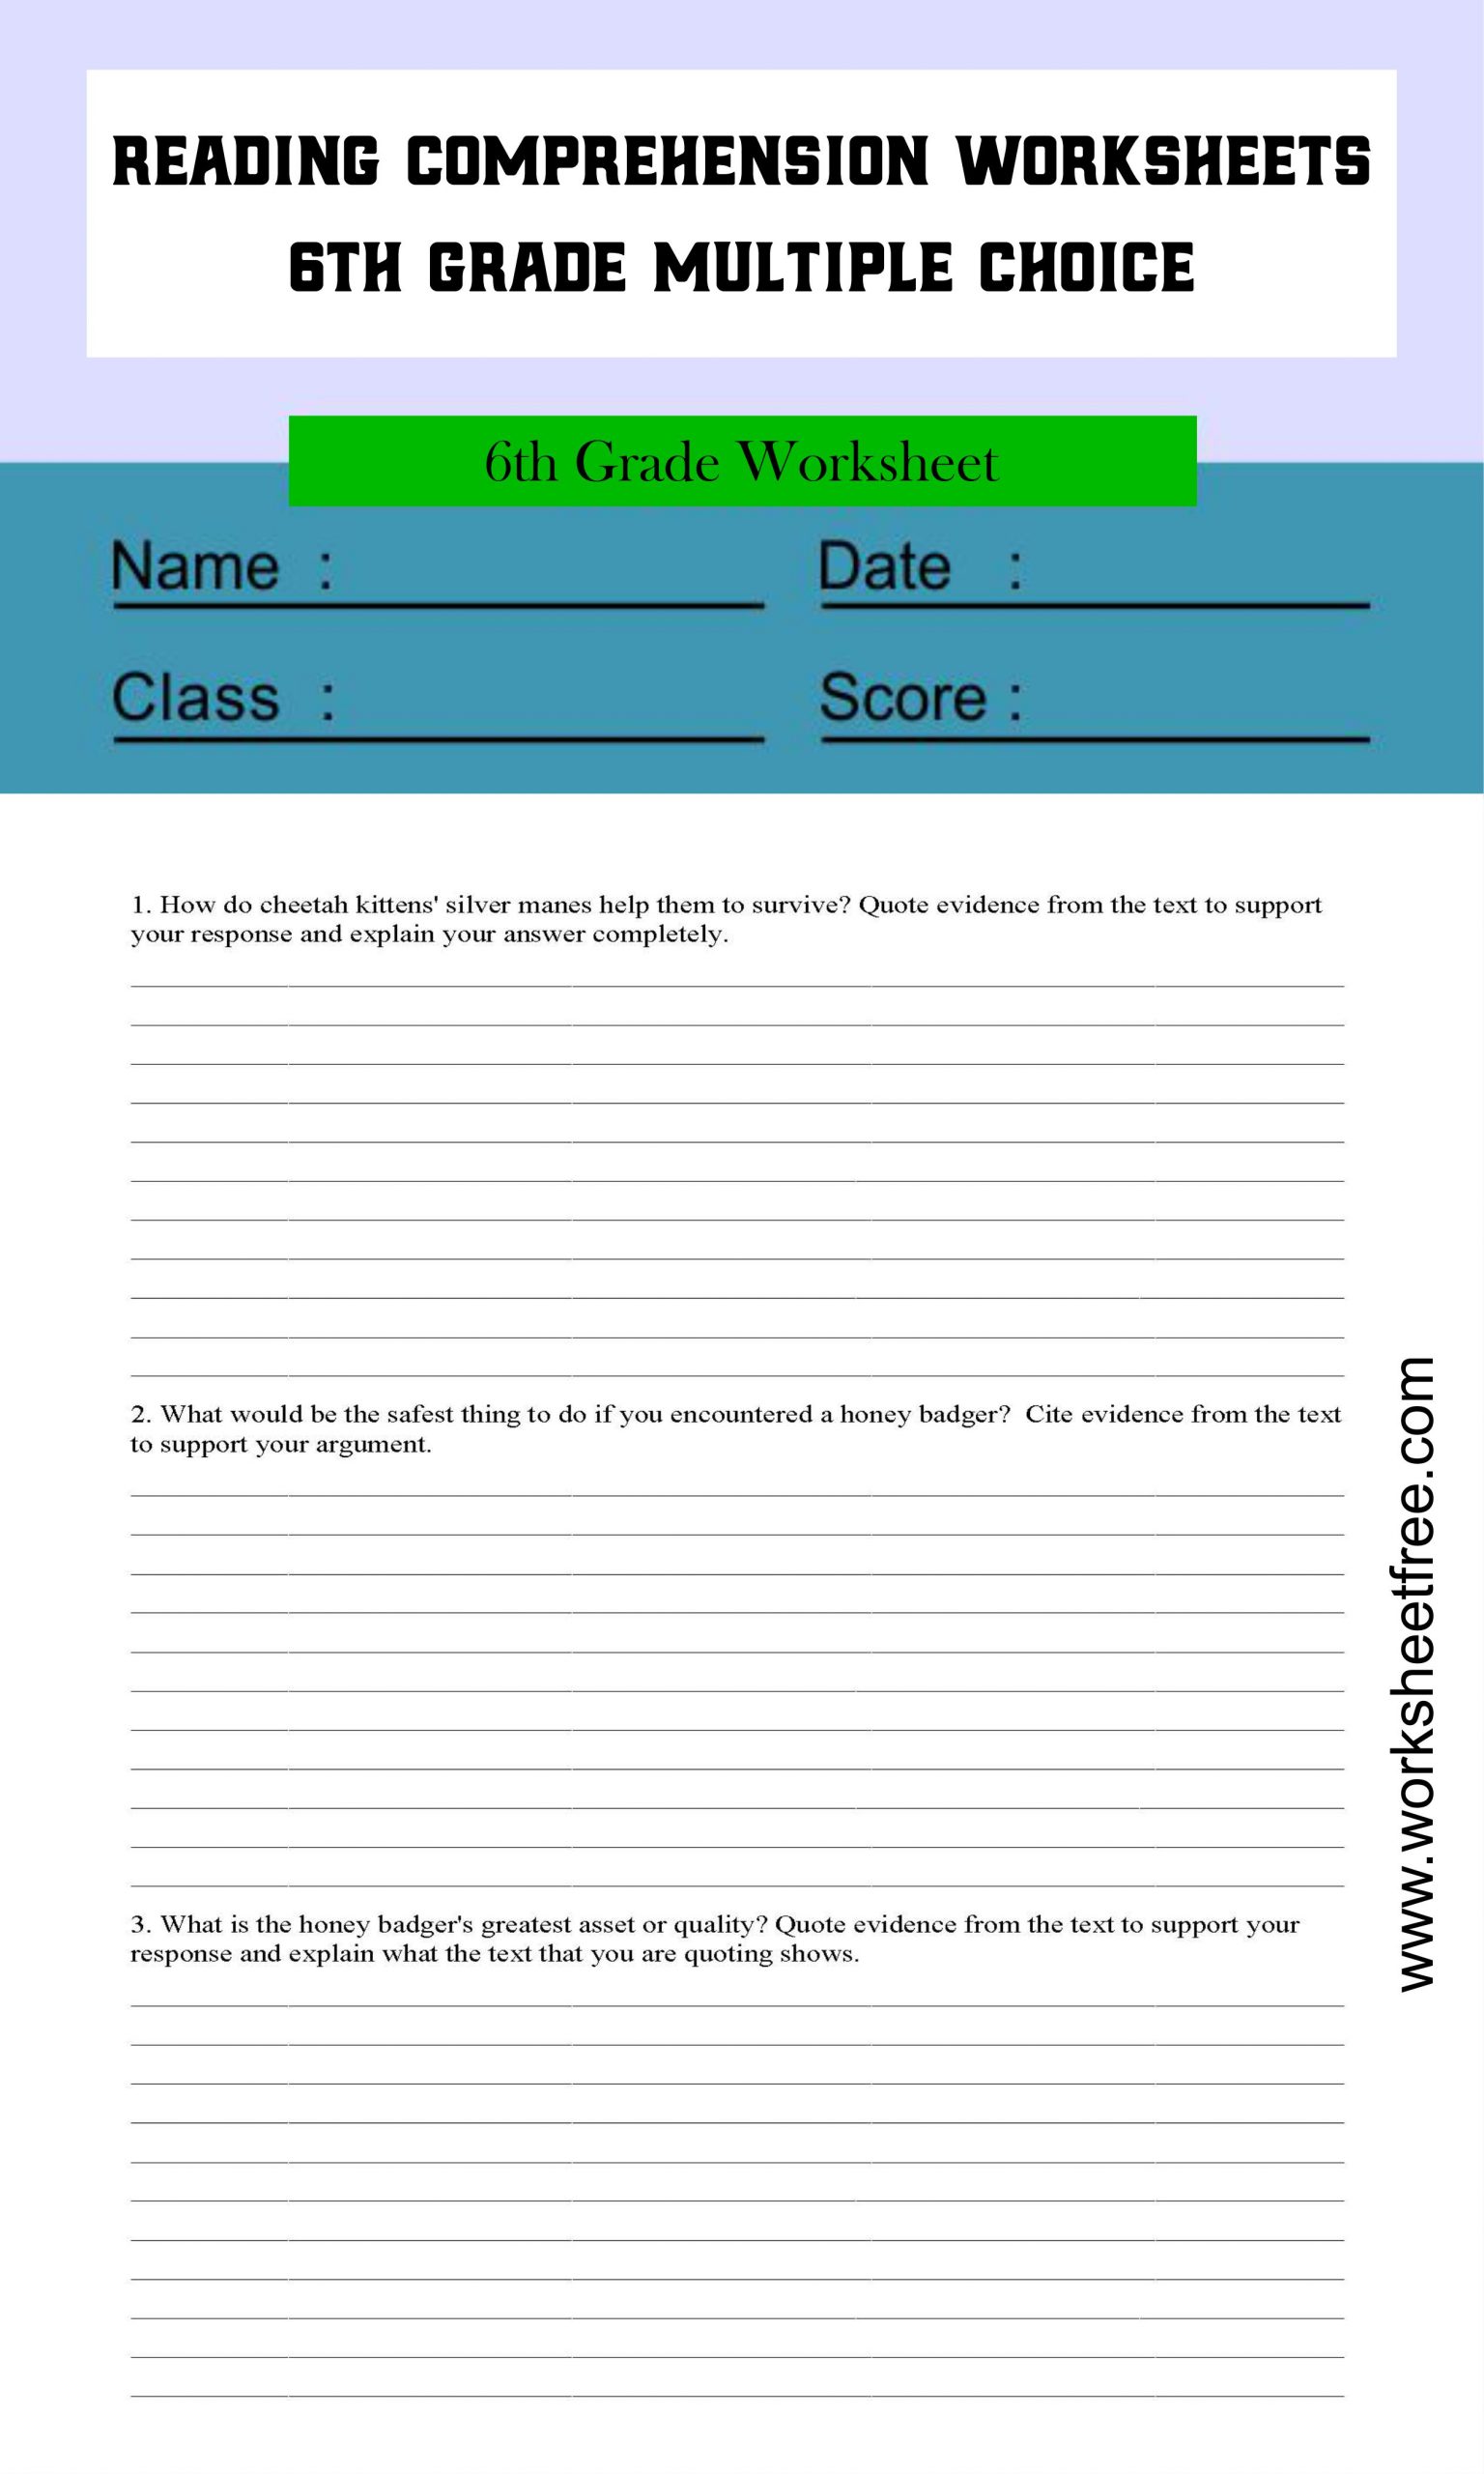 reading-comprehension-worksheets-6th-grade-multiple-choice-3